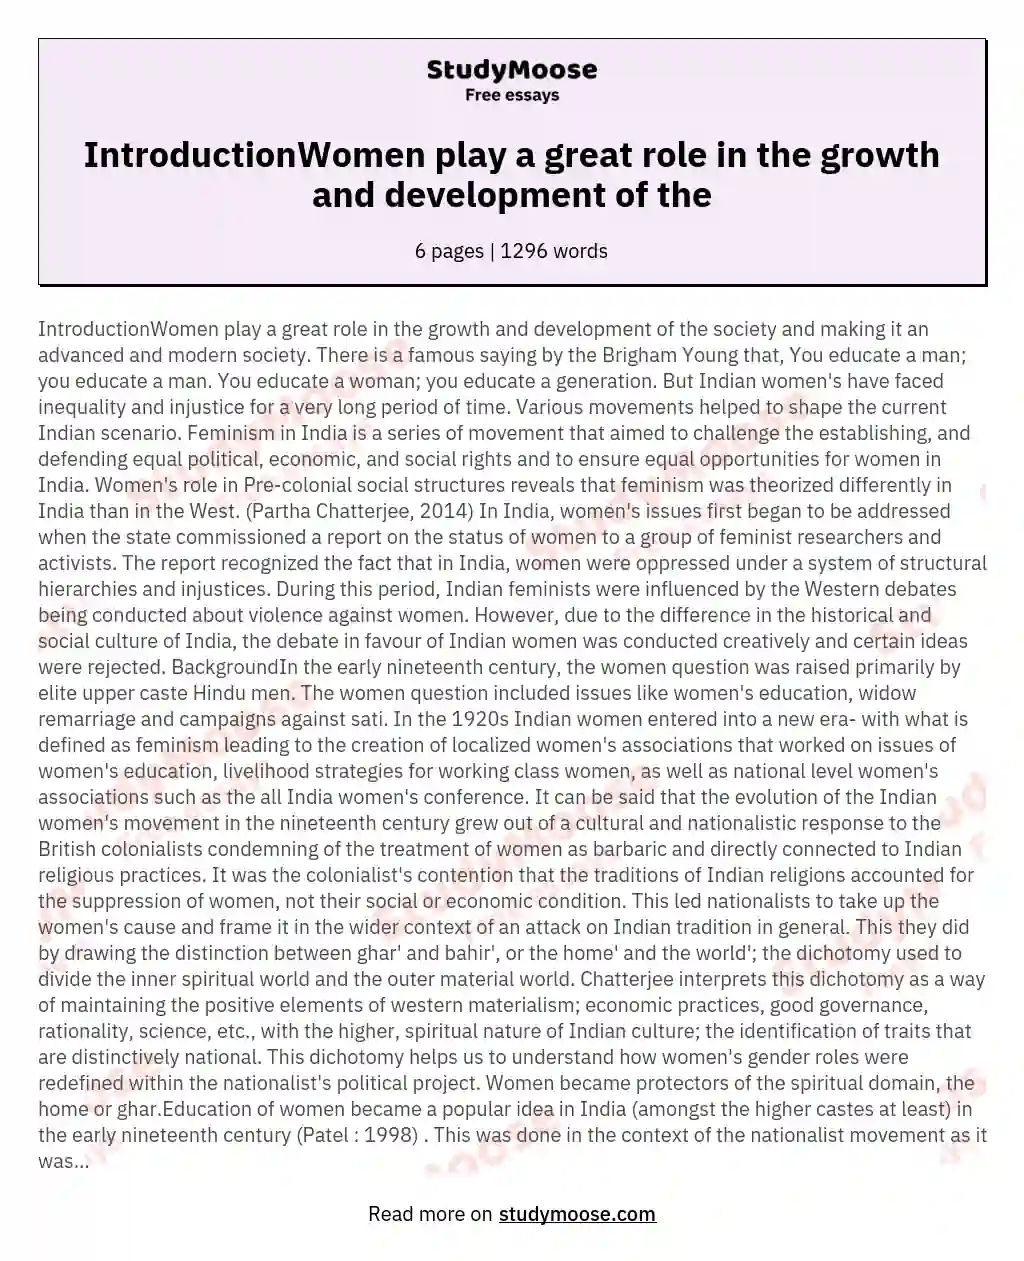 IntroductionWomen play a great role in the growth and development of the essay